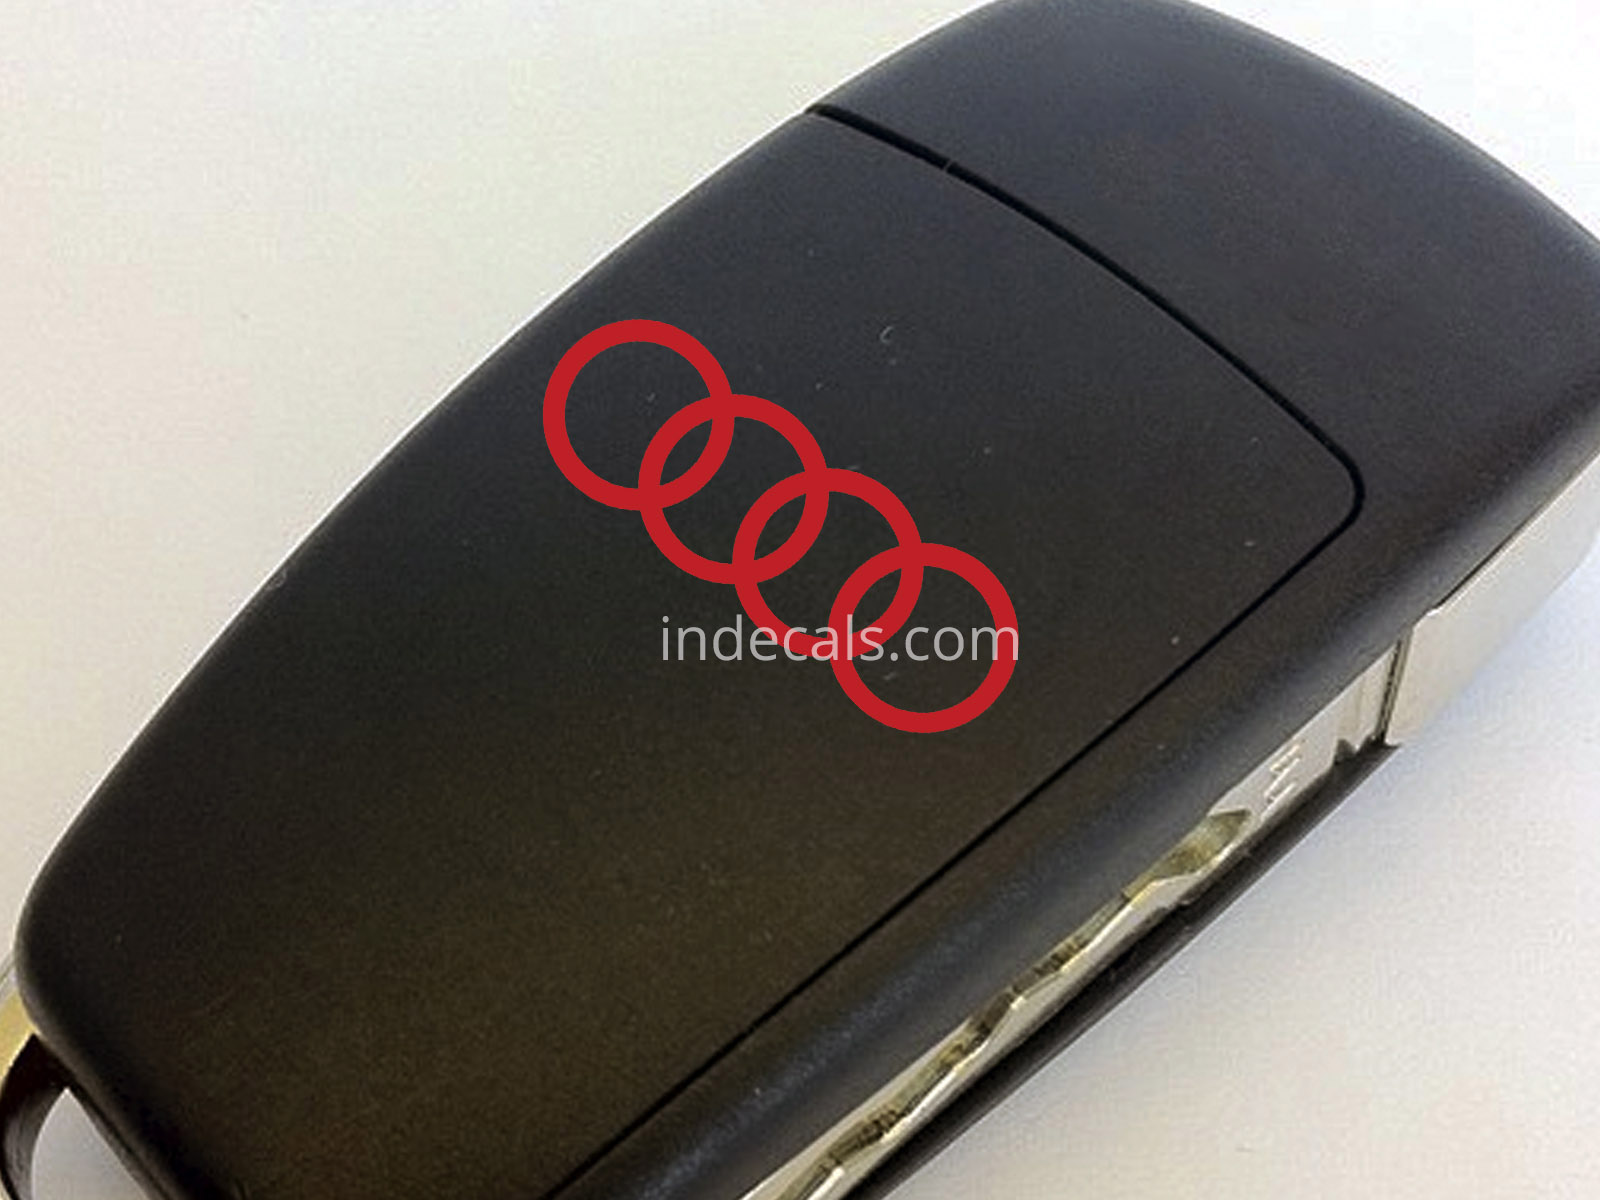 3 x Audi Rings Stickers for Key - Red